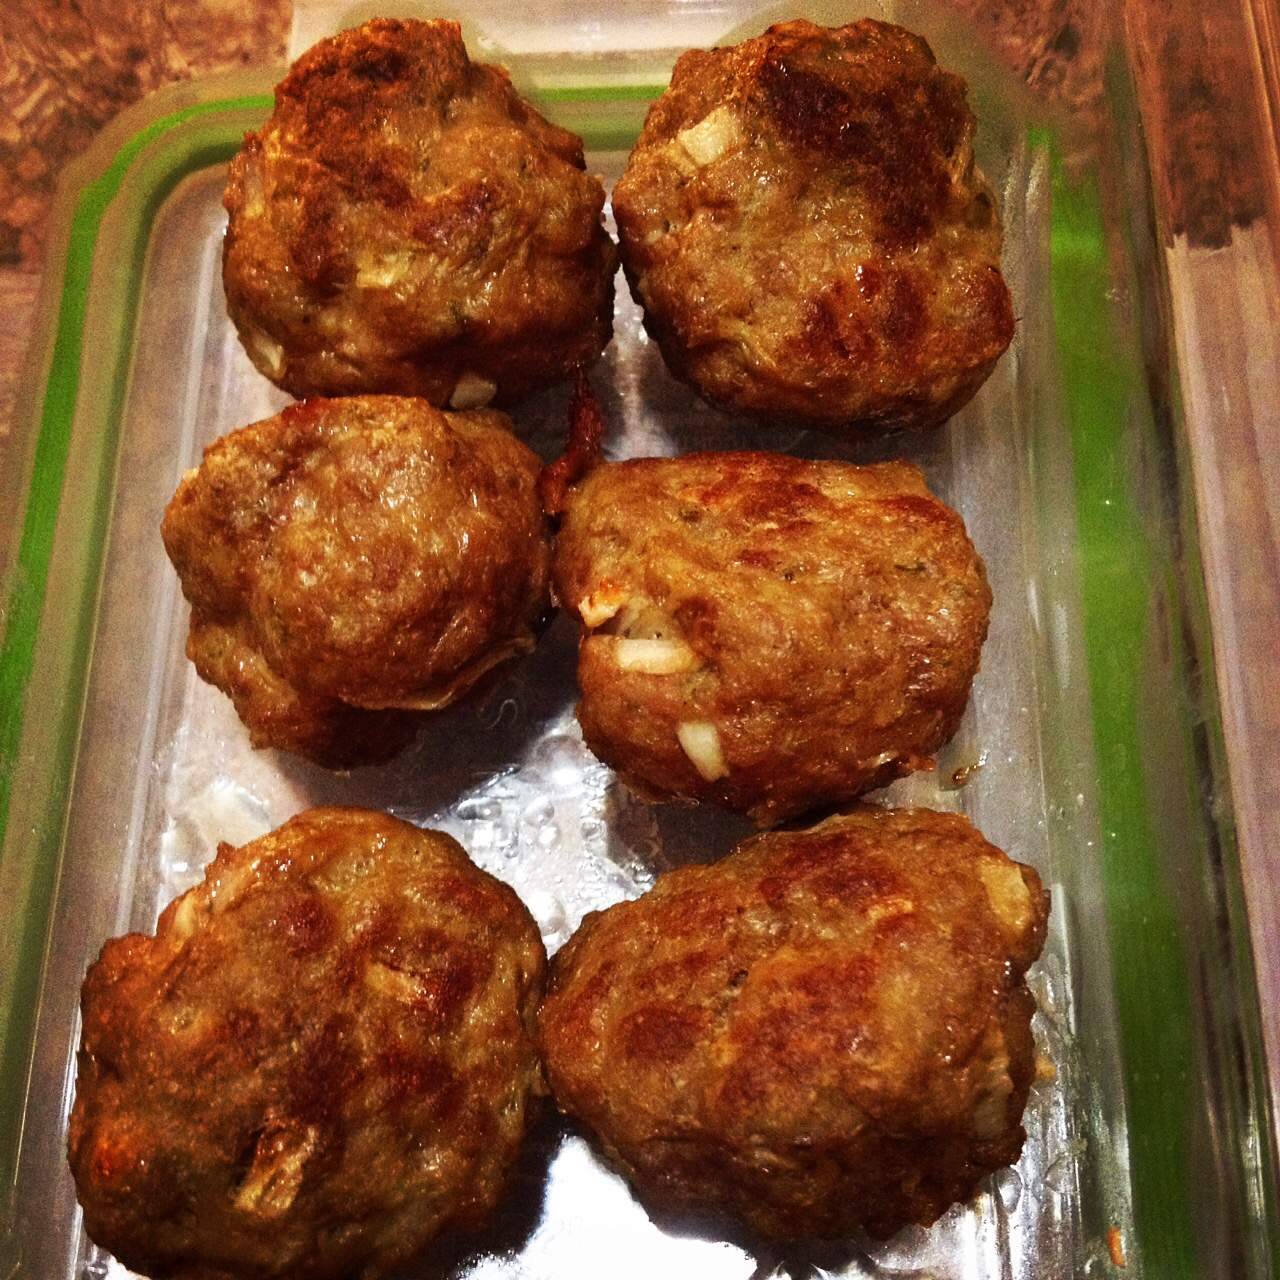 Homemade Meatballs in a clear container freezer meals